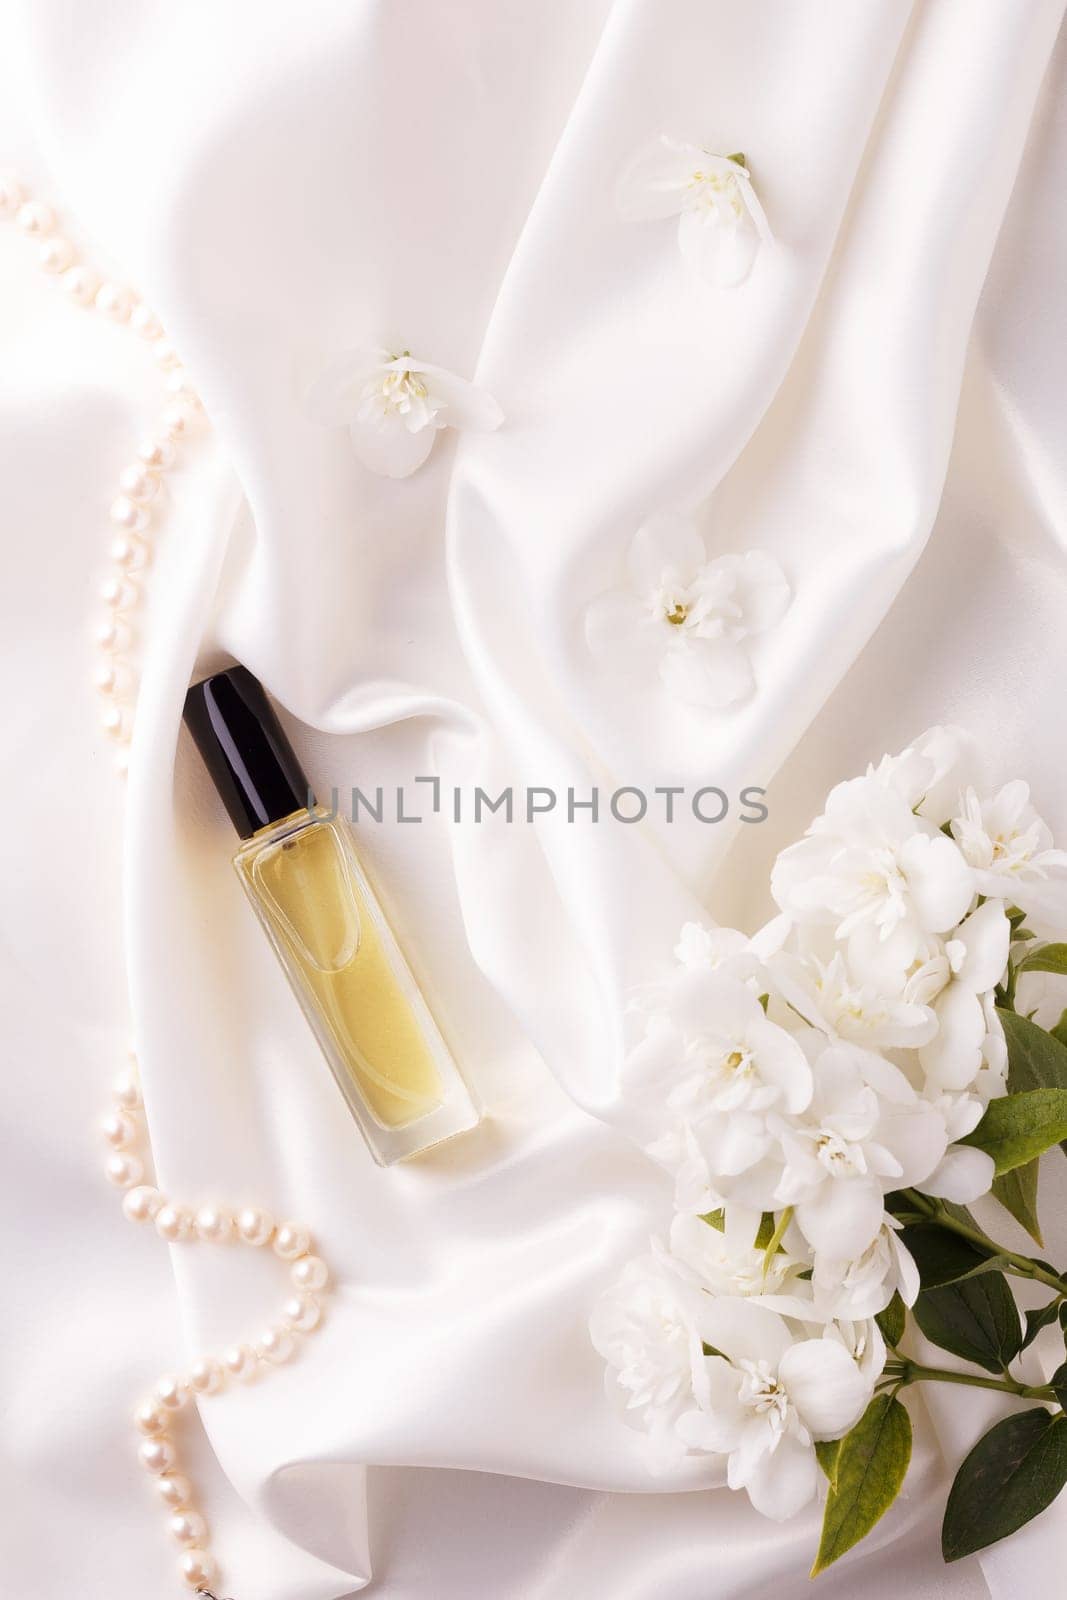 Perfume bottle with flowers on white satin fabric.